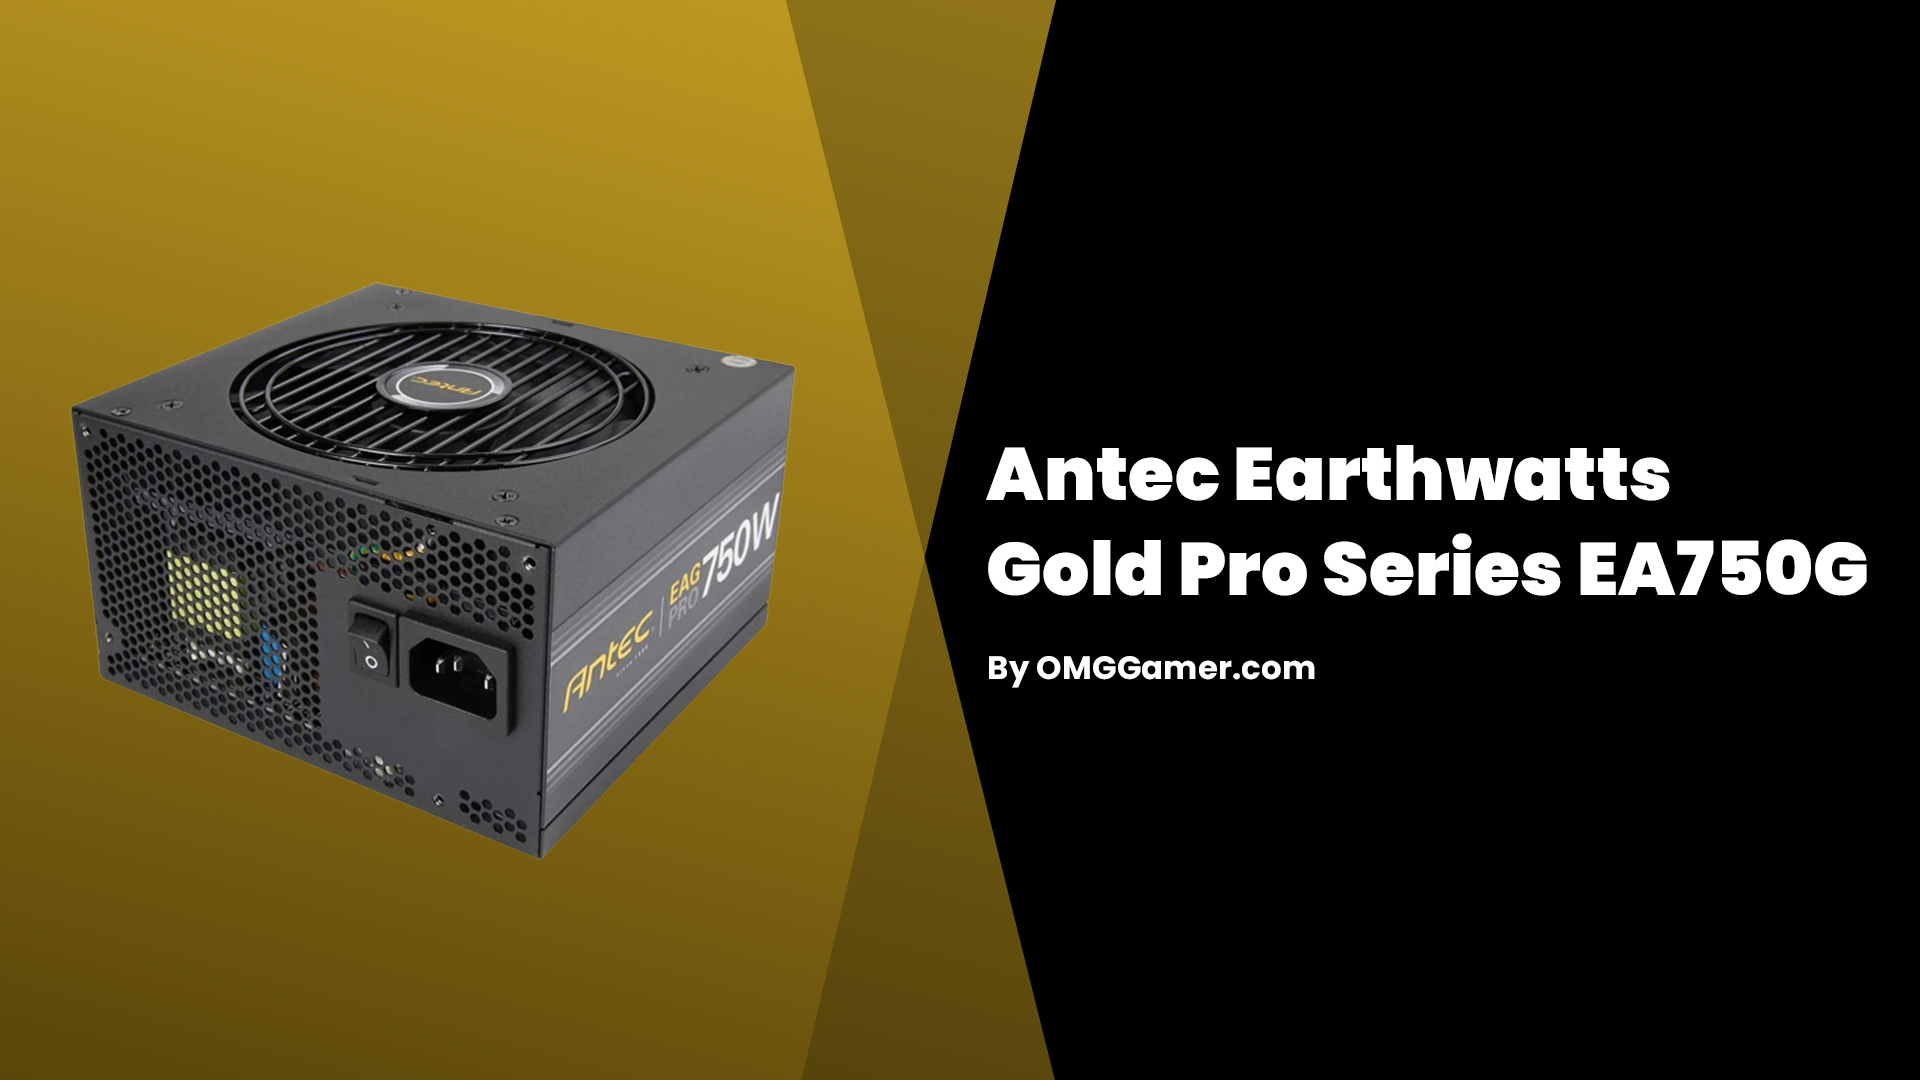 Antec Earthwatts Gold Pro Series EA750G: Power Supply for Gaming PC